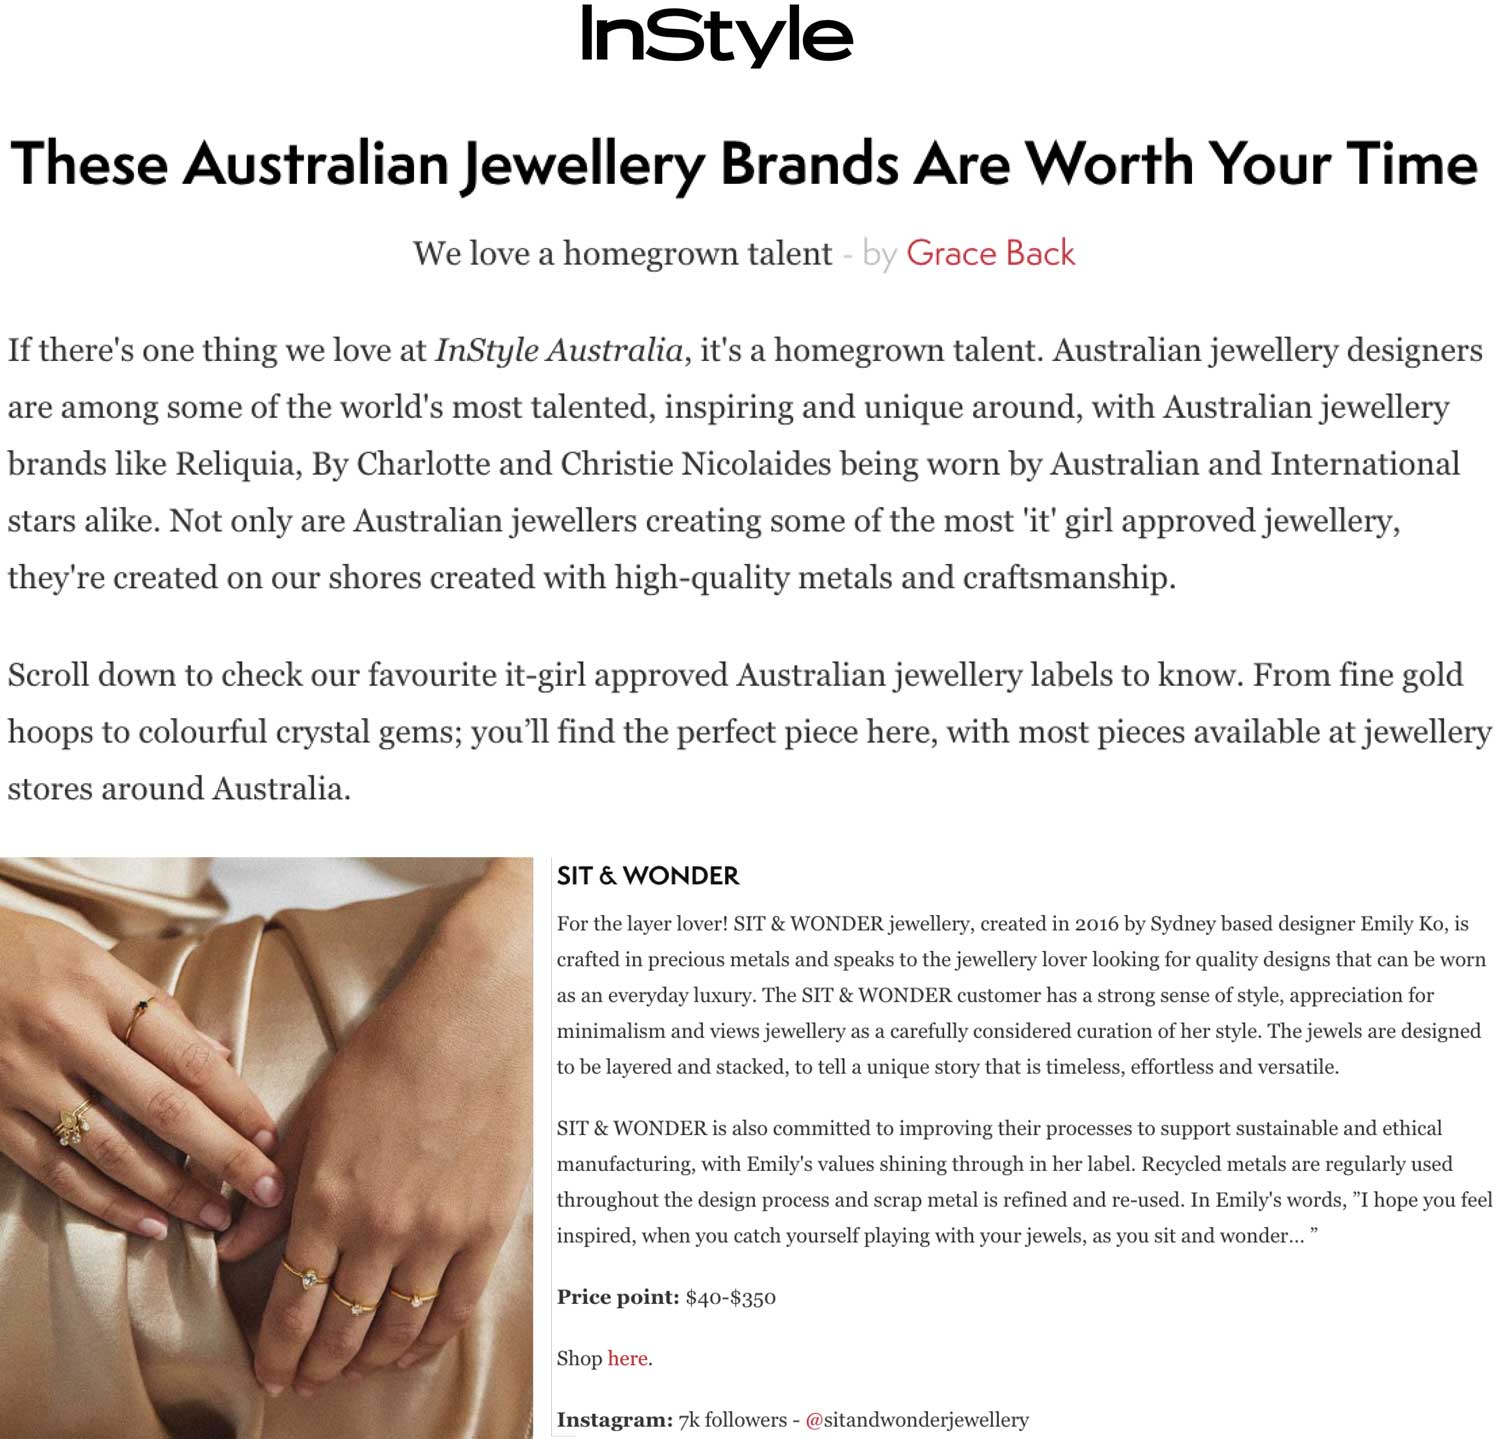 Top 14 Australian Jewellery Brands Worth Your Time - In Style Mag - Featuring Sit & Wonder